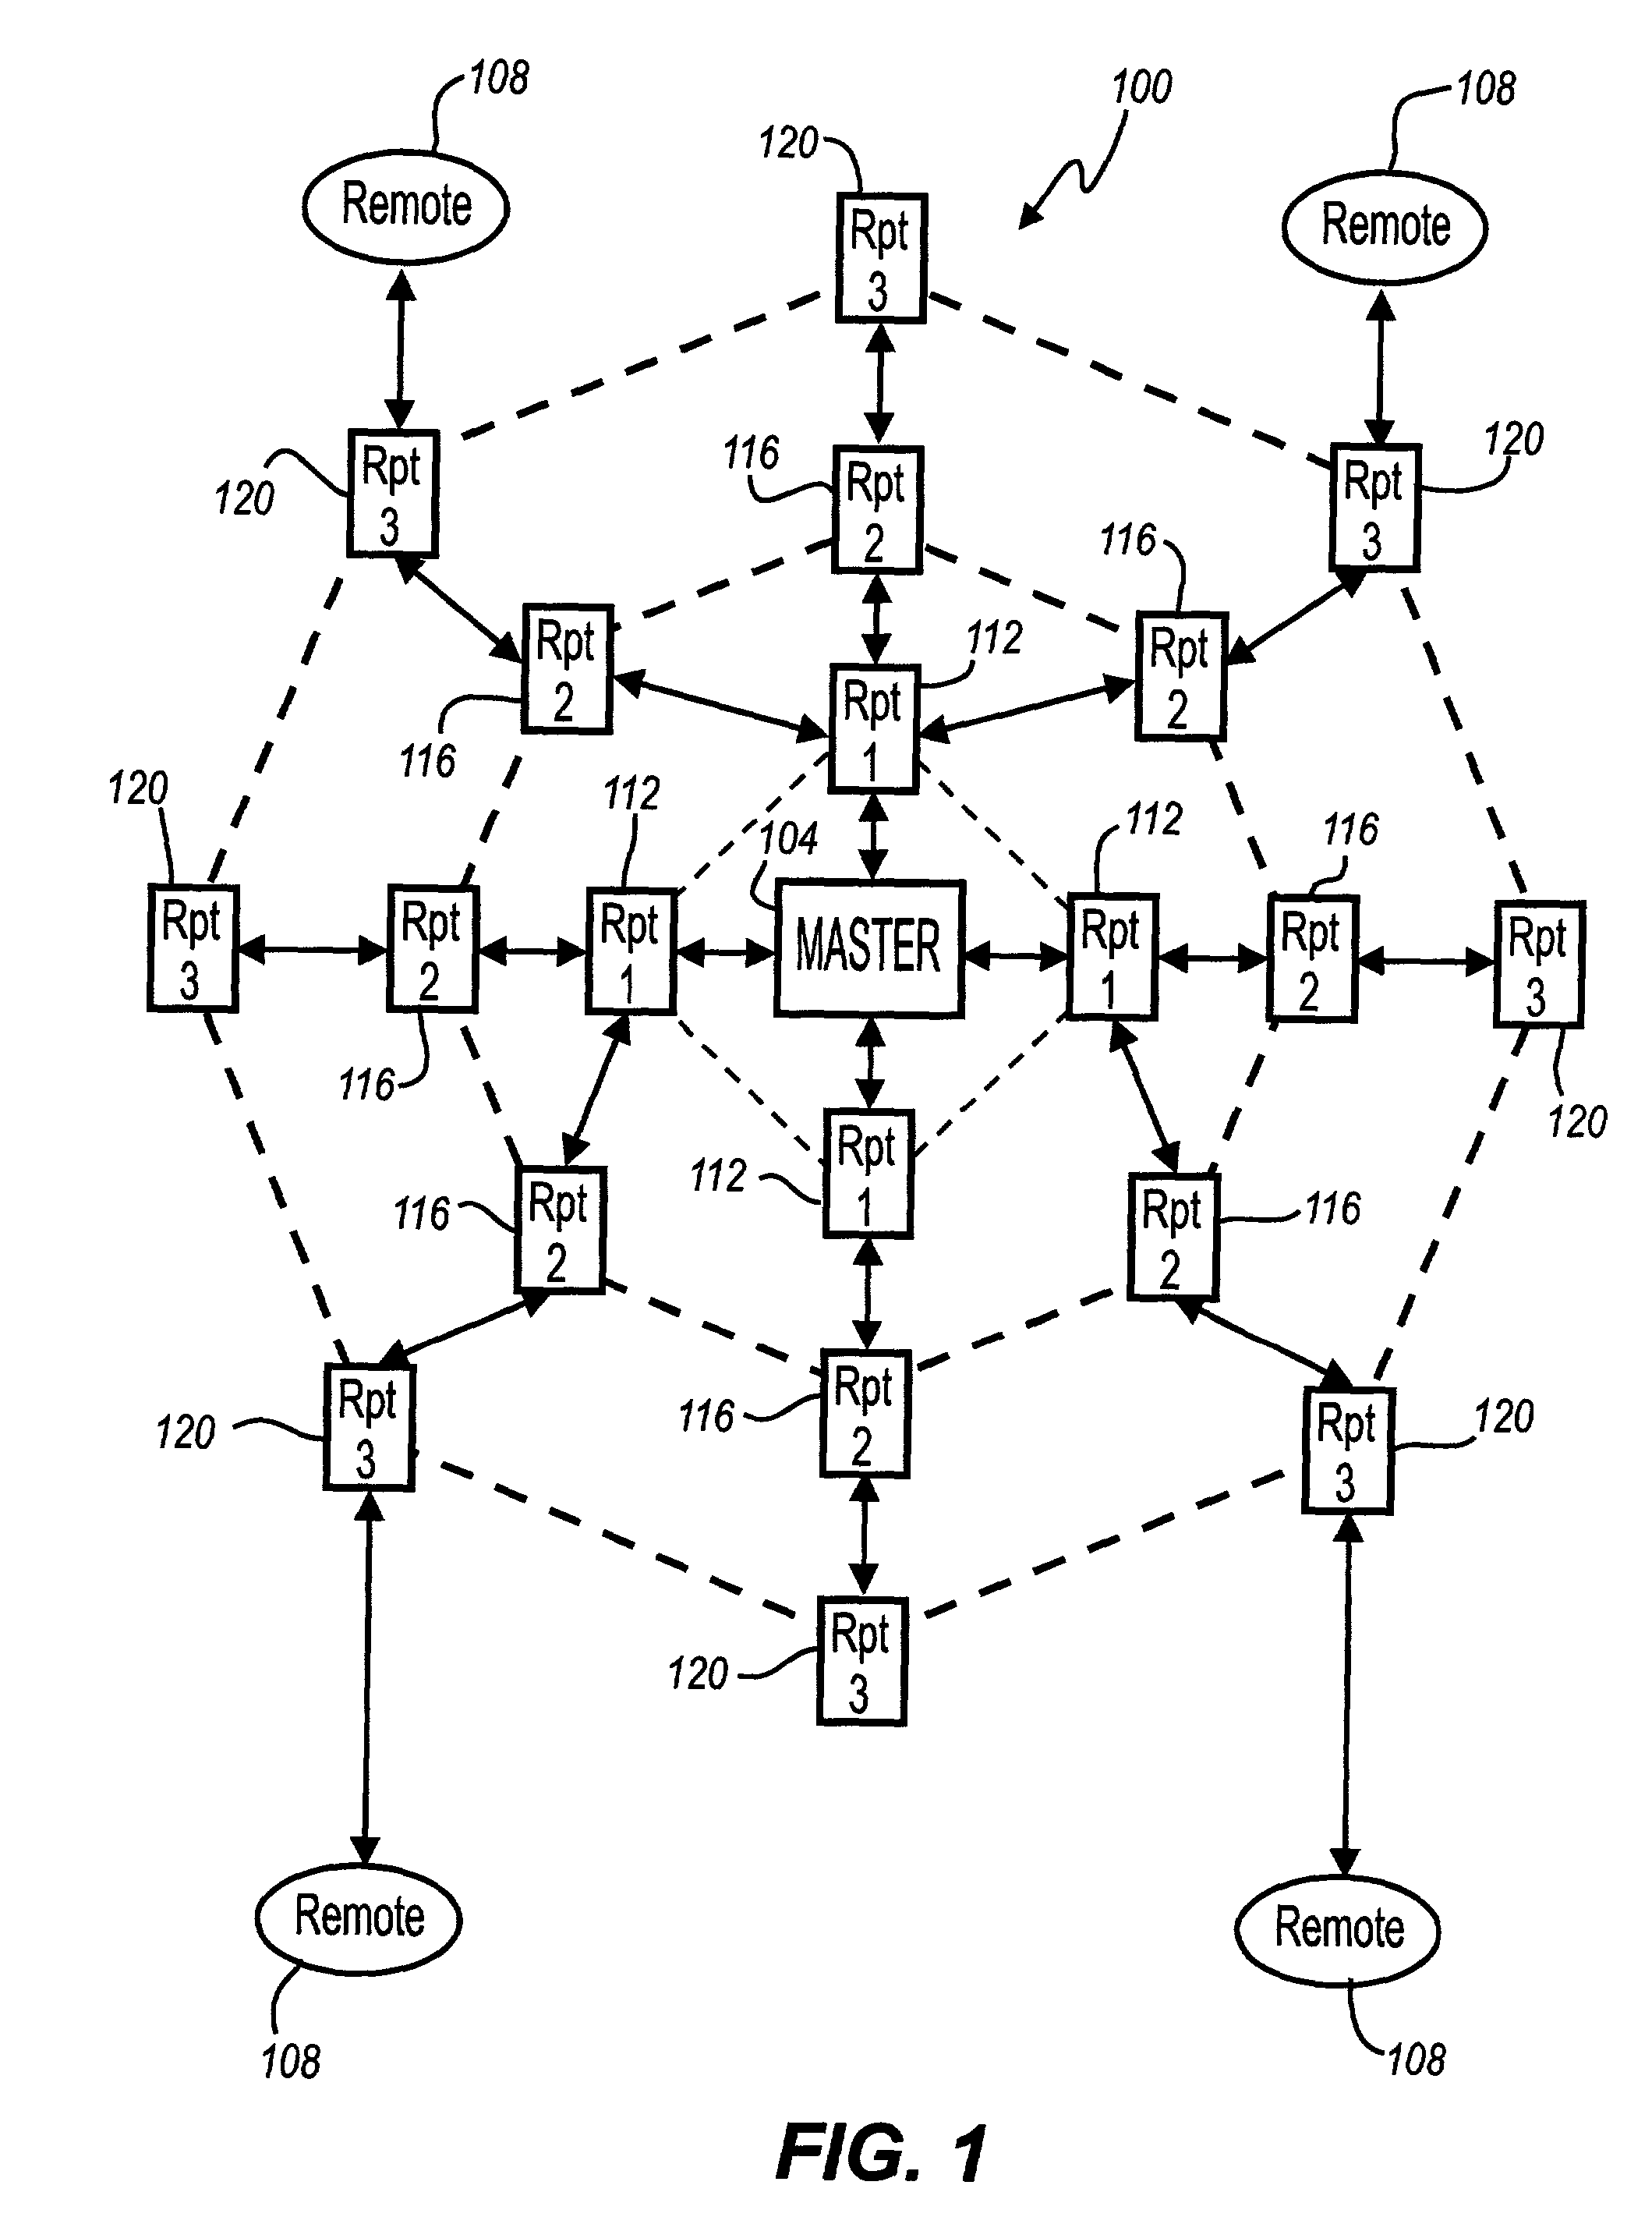 Message control protocol in a communications network having repeaters